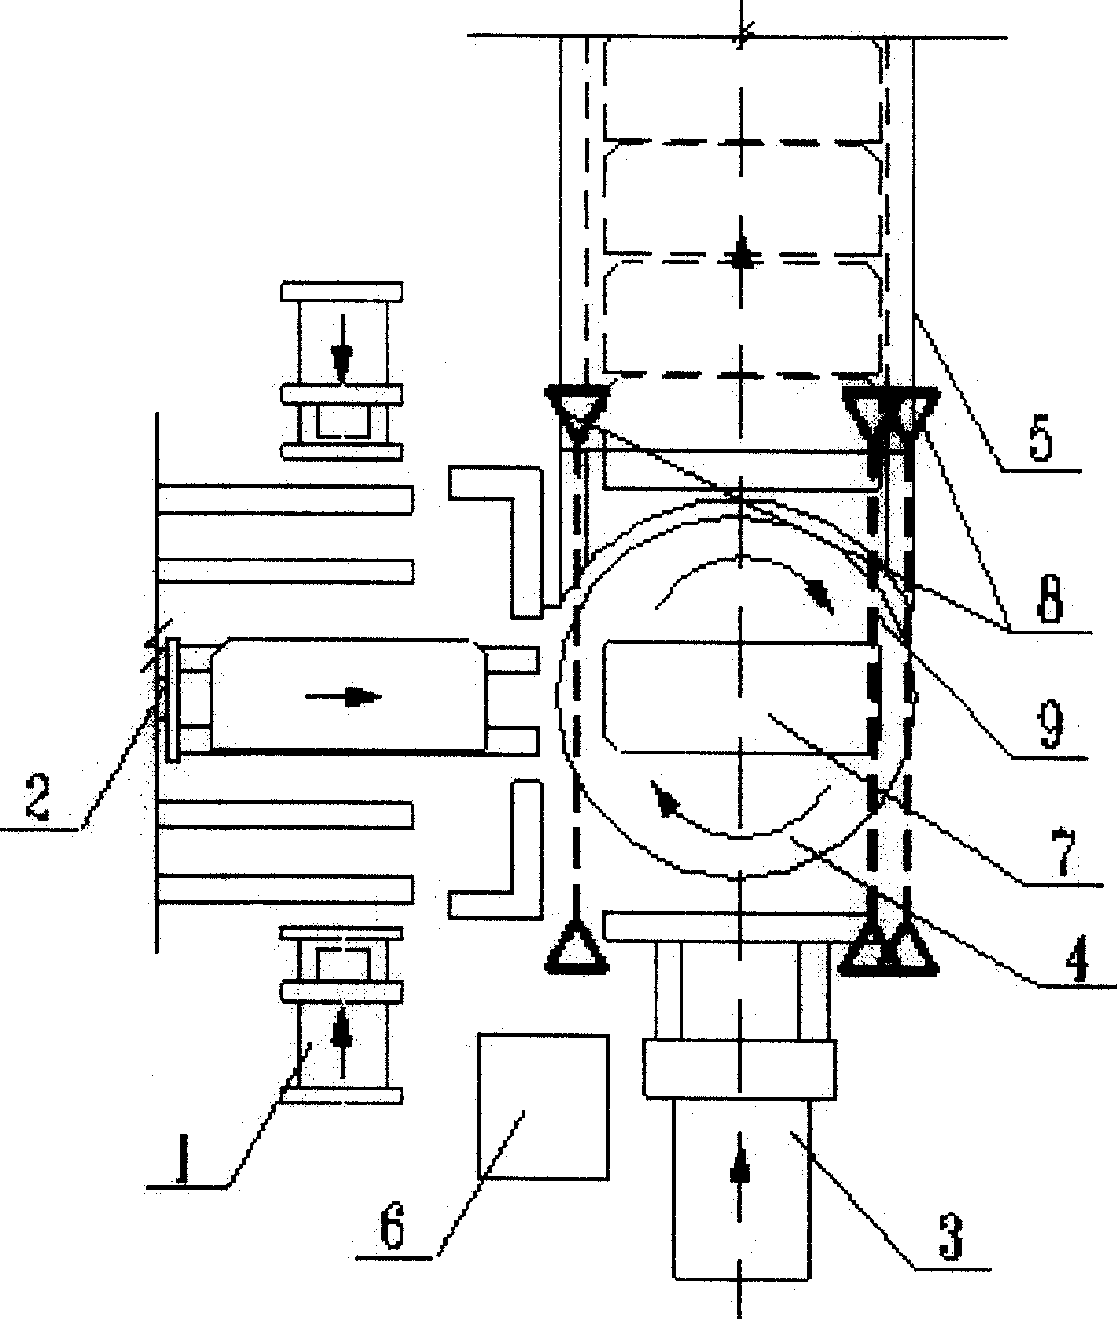 Positioning method and apparatus for pushing carbon block from transfer line rotary platform to receiving arrangement